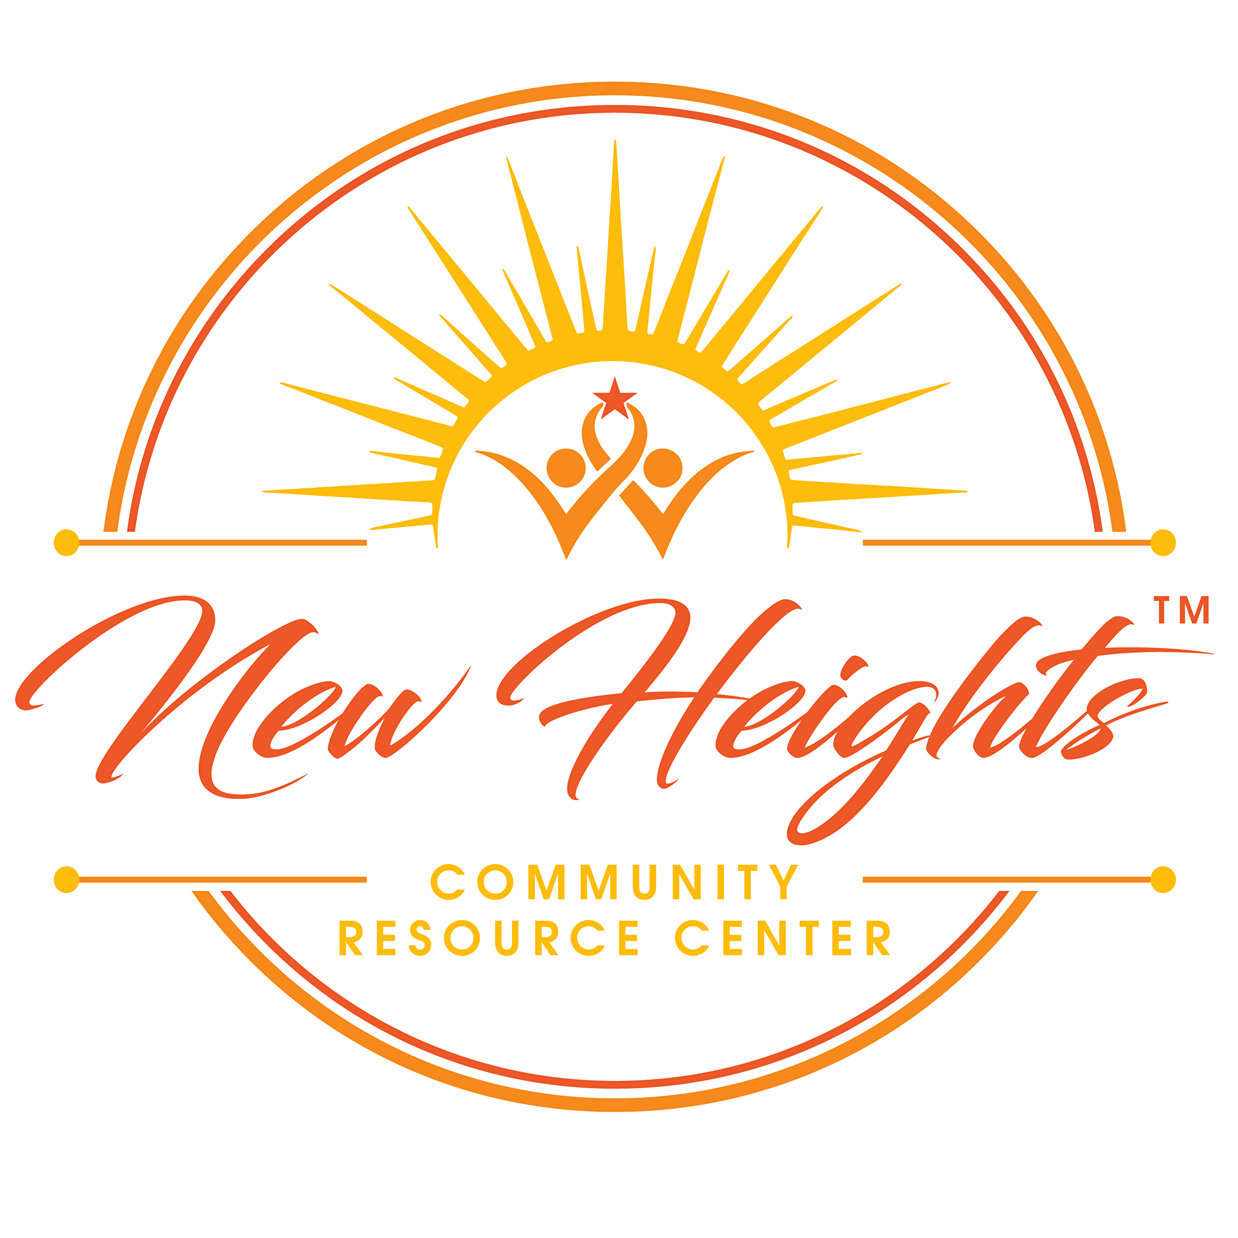 Great Nonprofits Announces New Heights Community Resource Center as a 2022 Top-Rated Nonprofit